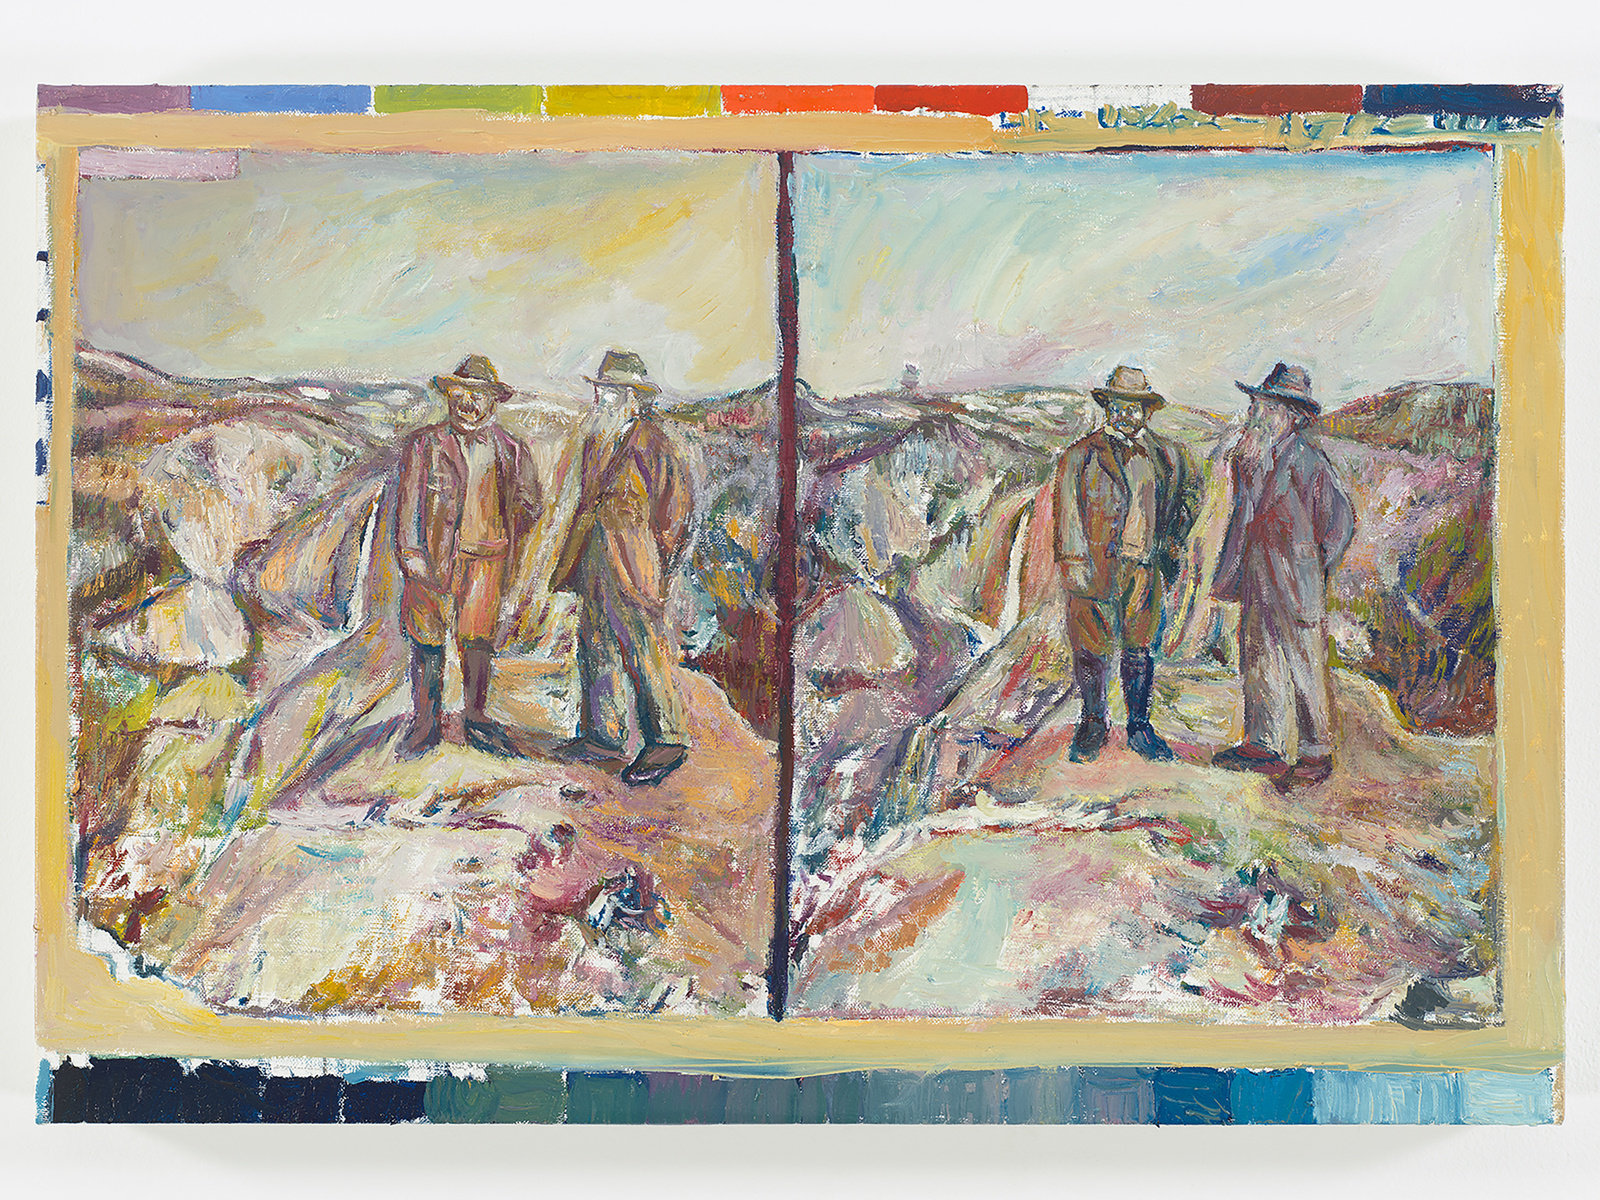 Mayerson, theodore roosevelt and john muir on glacier point, yosemite valley, california in 1903, 2017, oil on linen, 13.5 x 20 in., 34.3 x 50.8 cm, cnon 59.448